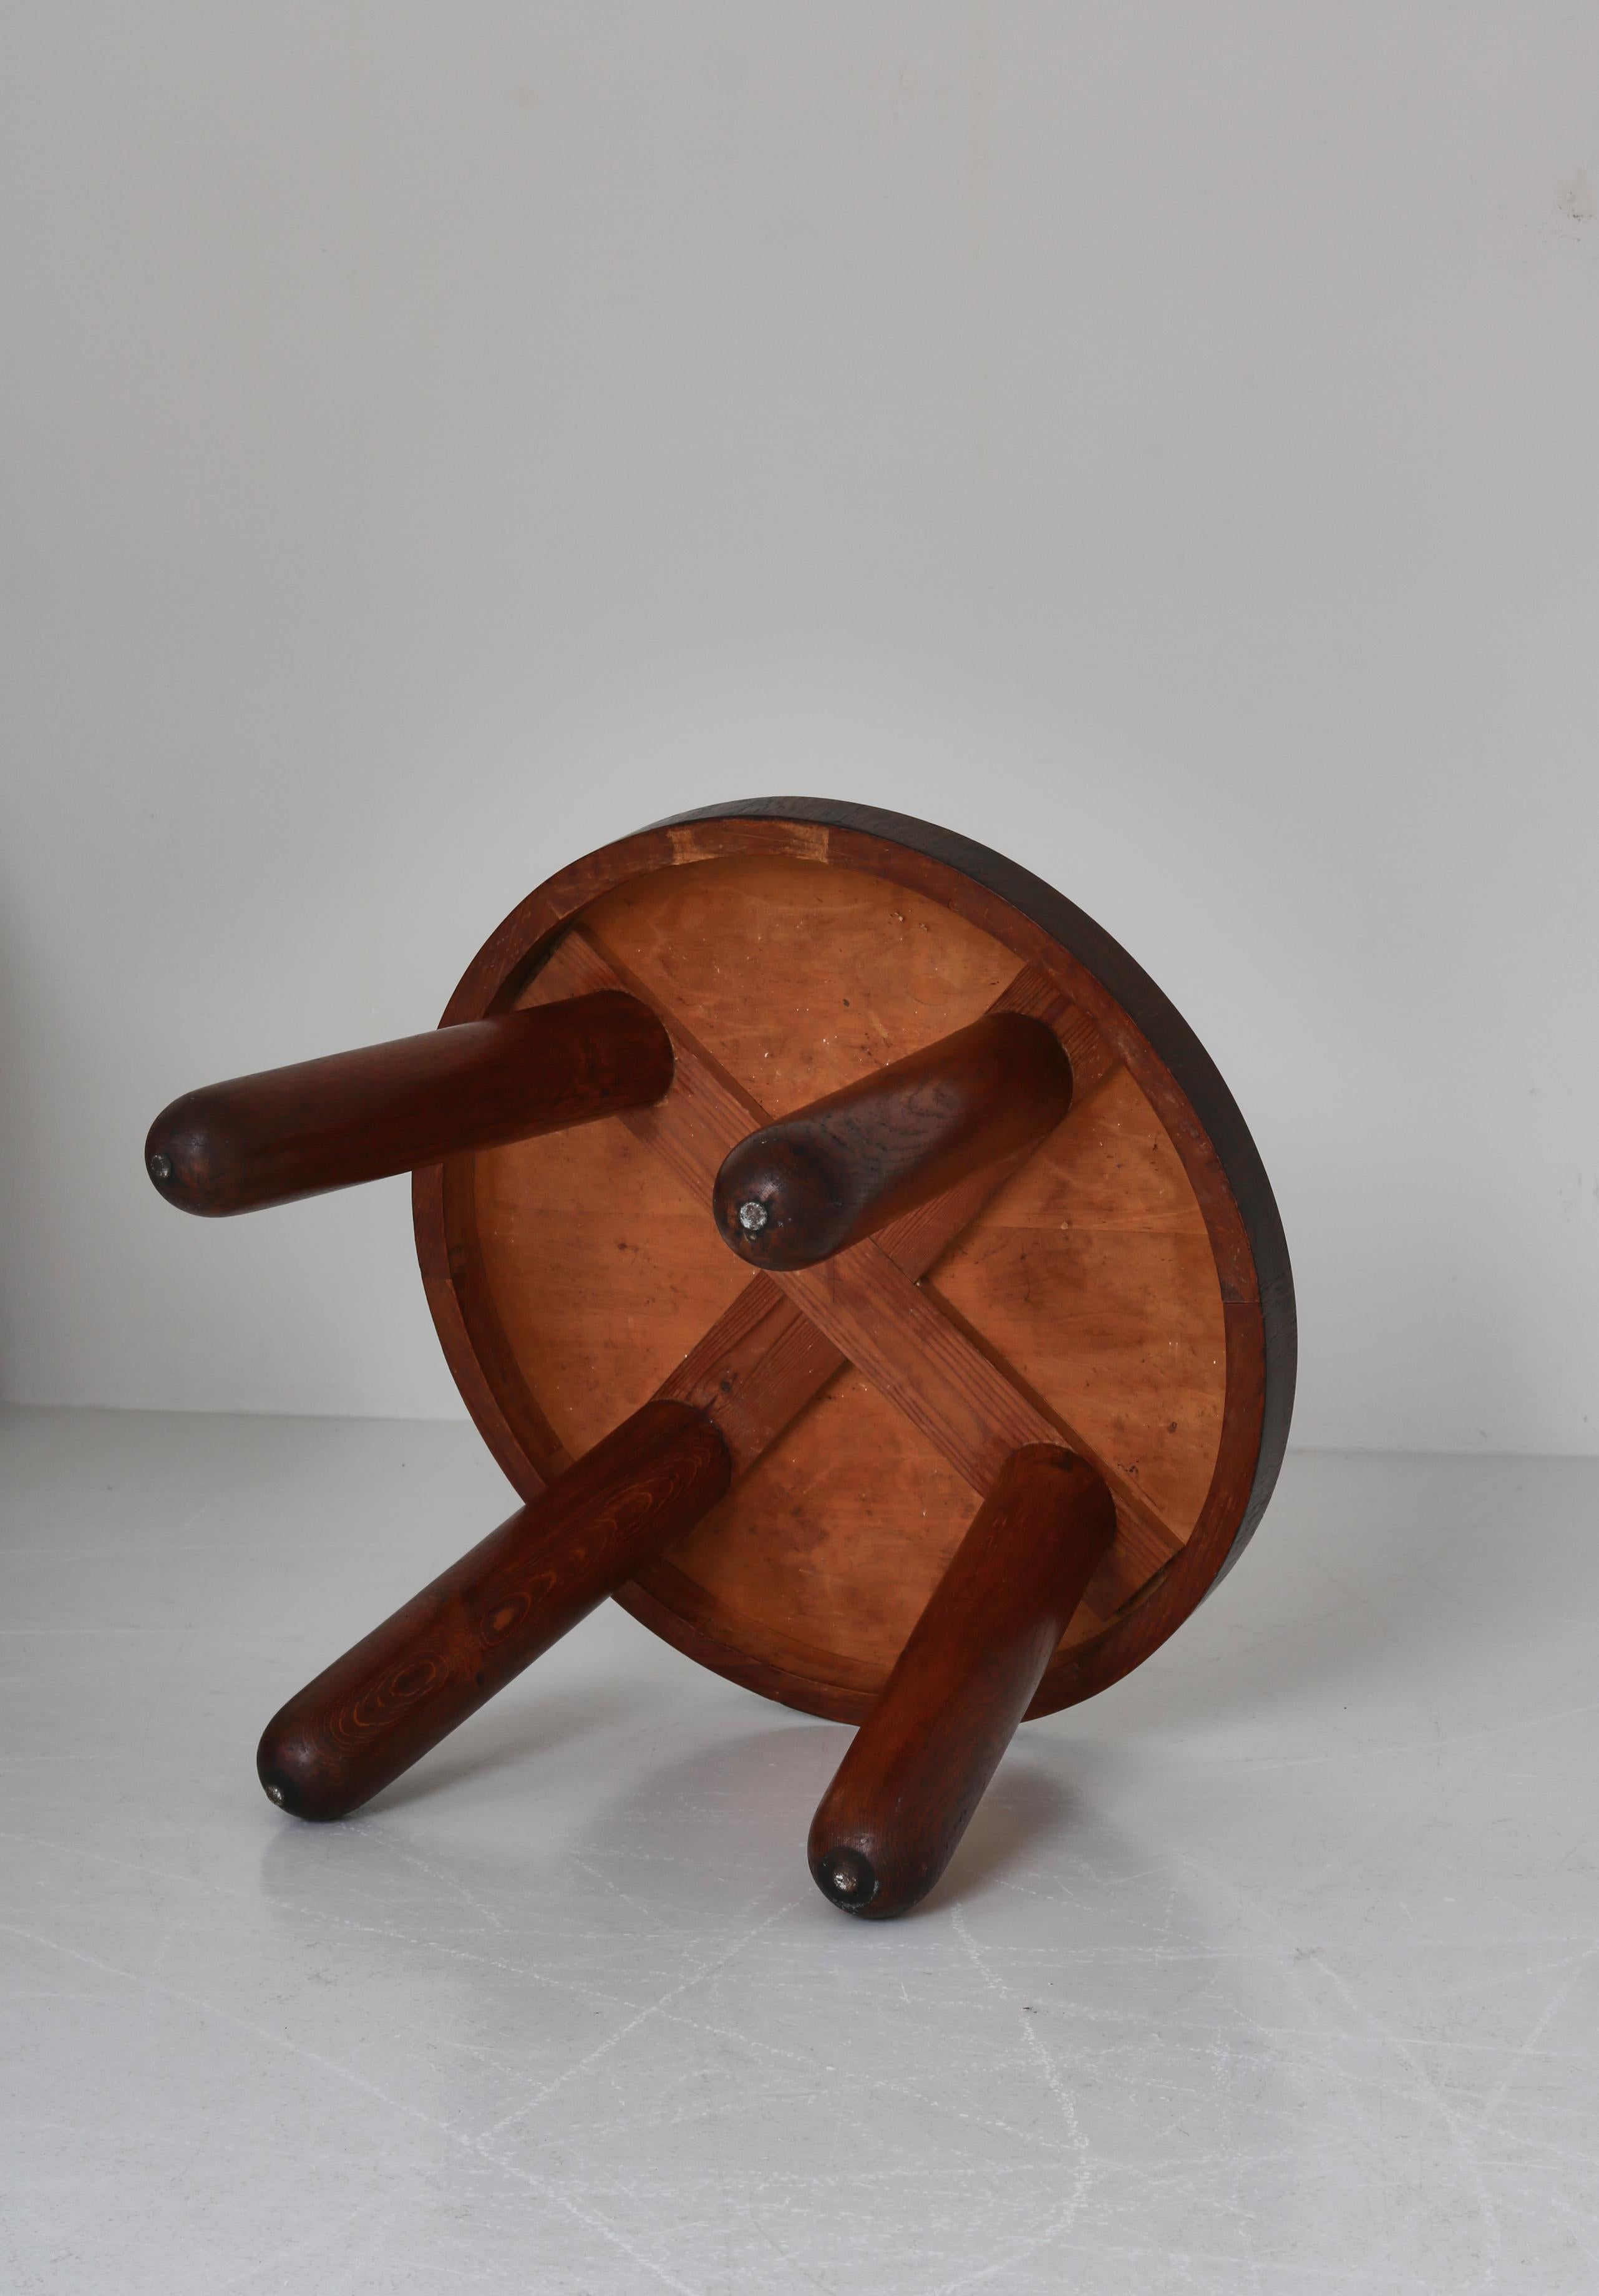 Chunky Danish Modern Side Table in Stained Oak by Otto Færge, Denmark, 1940s For Sale 8